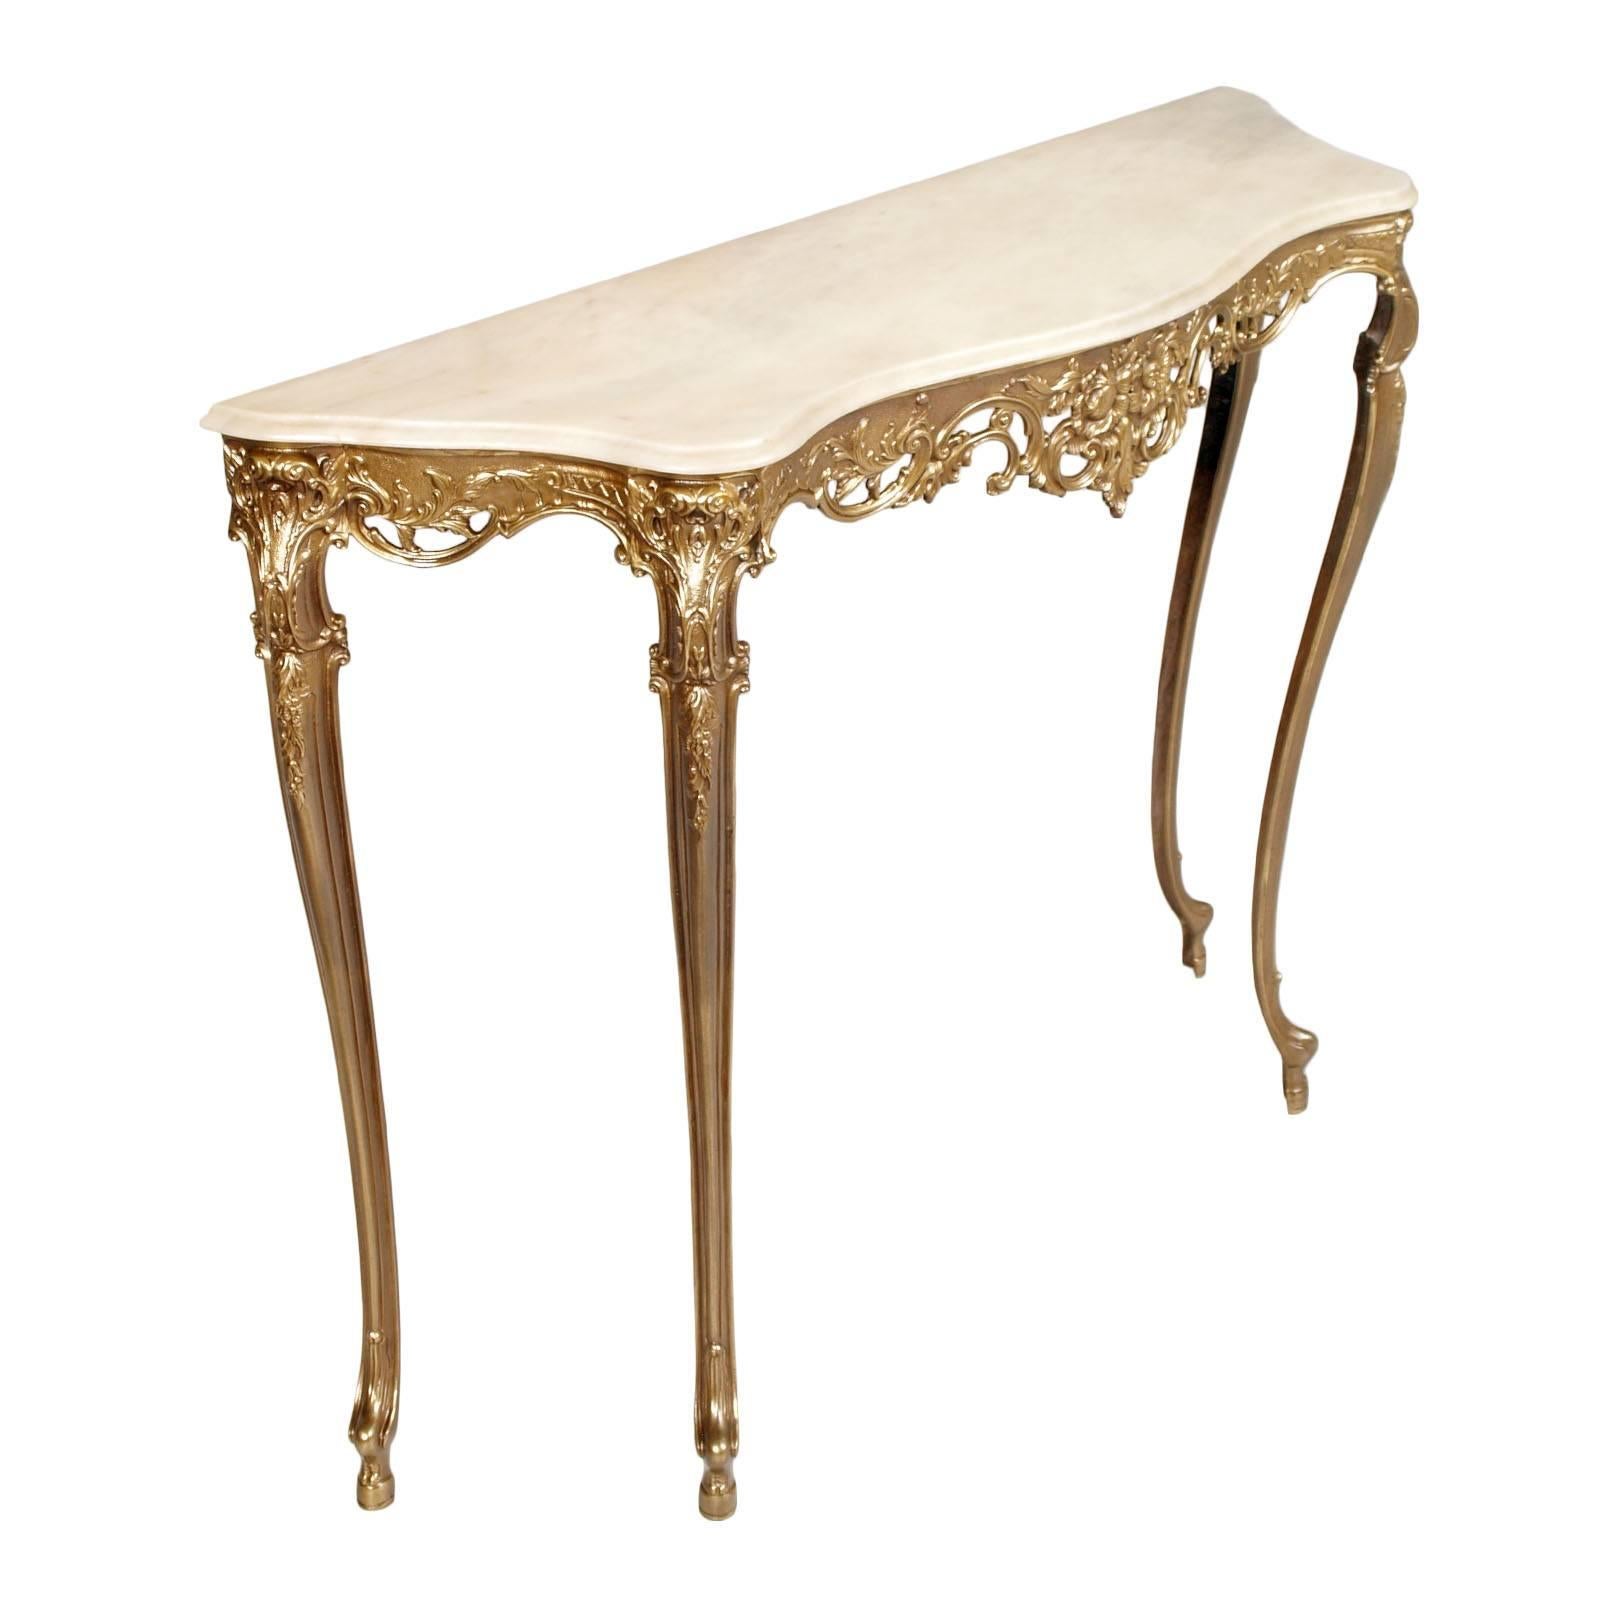 Refined Venetian console in molten bronze, burnished, clear top in onyx.

Measure cm: H 81, W 110, D 32.